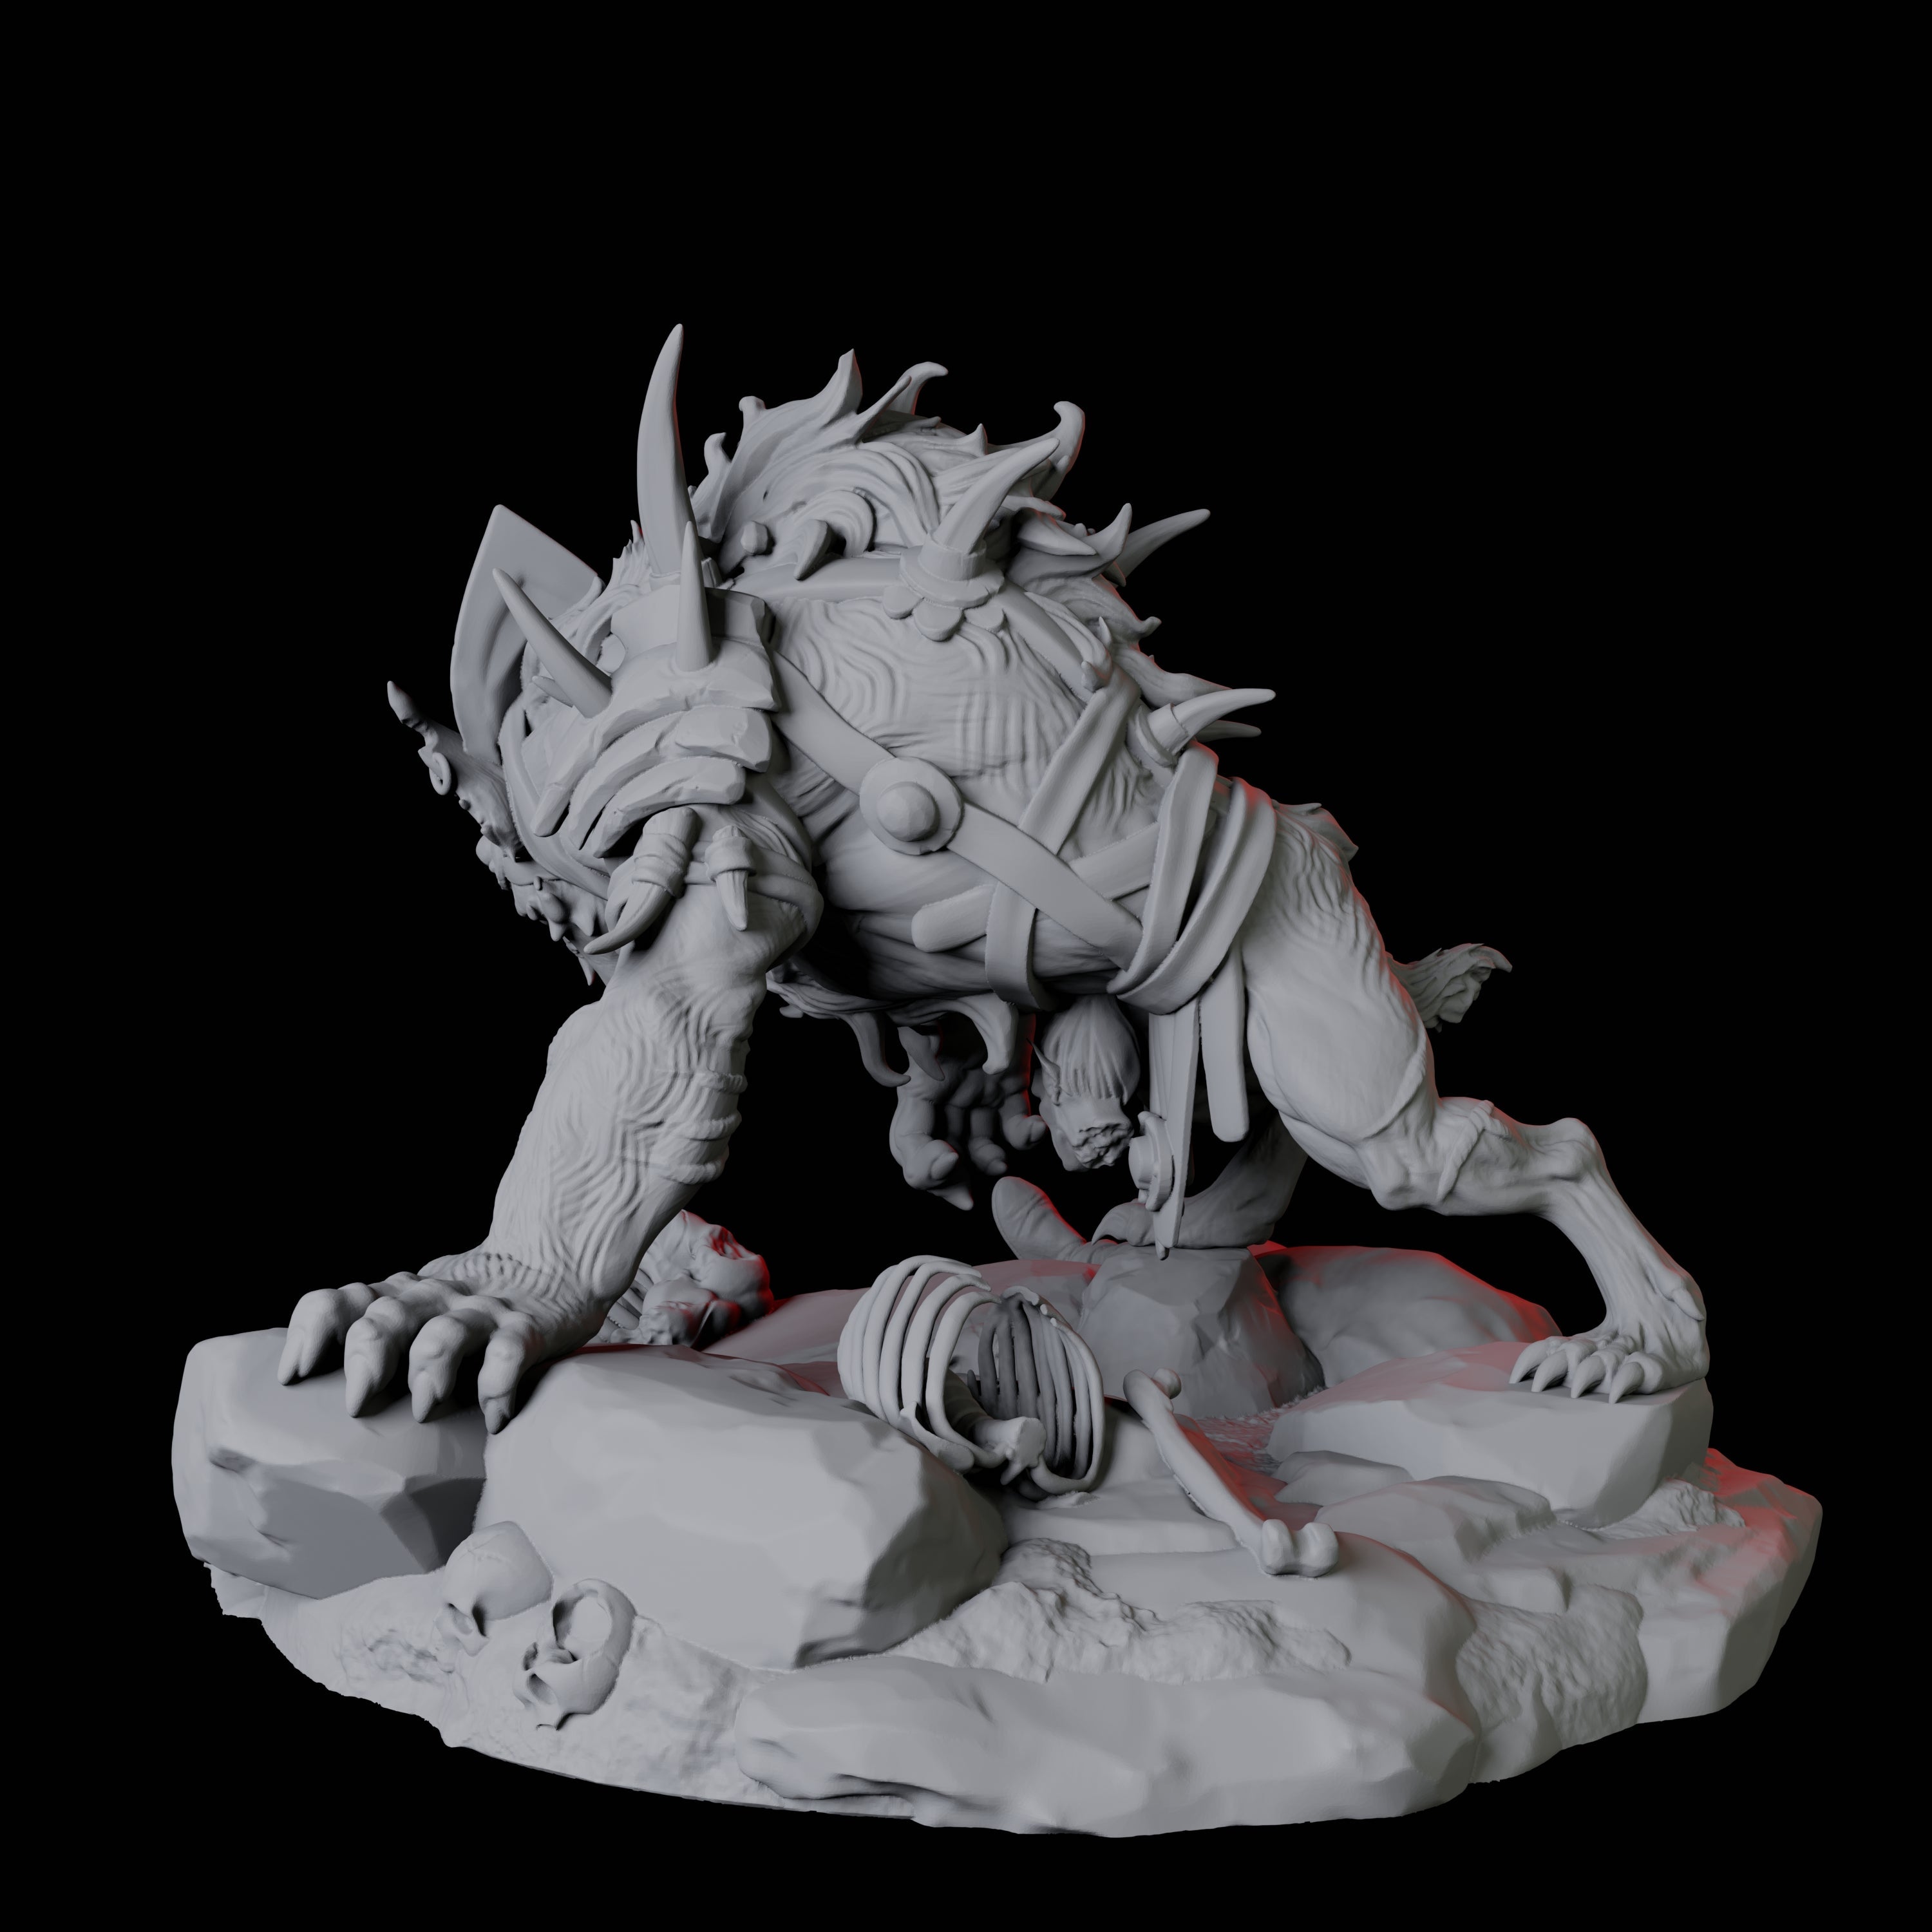 Gnoll Tracker A Miniature for Dungeons and Dragons, Pathfinder or other TTRPGs